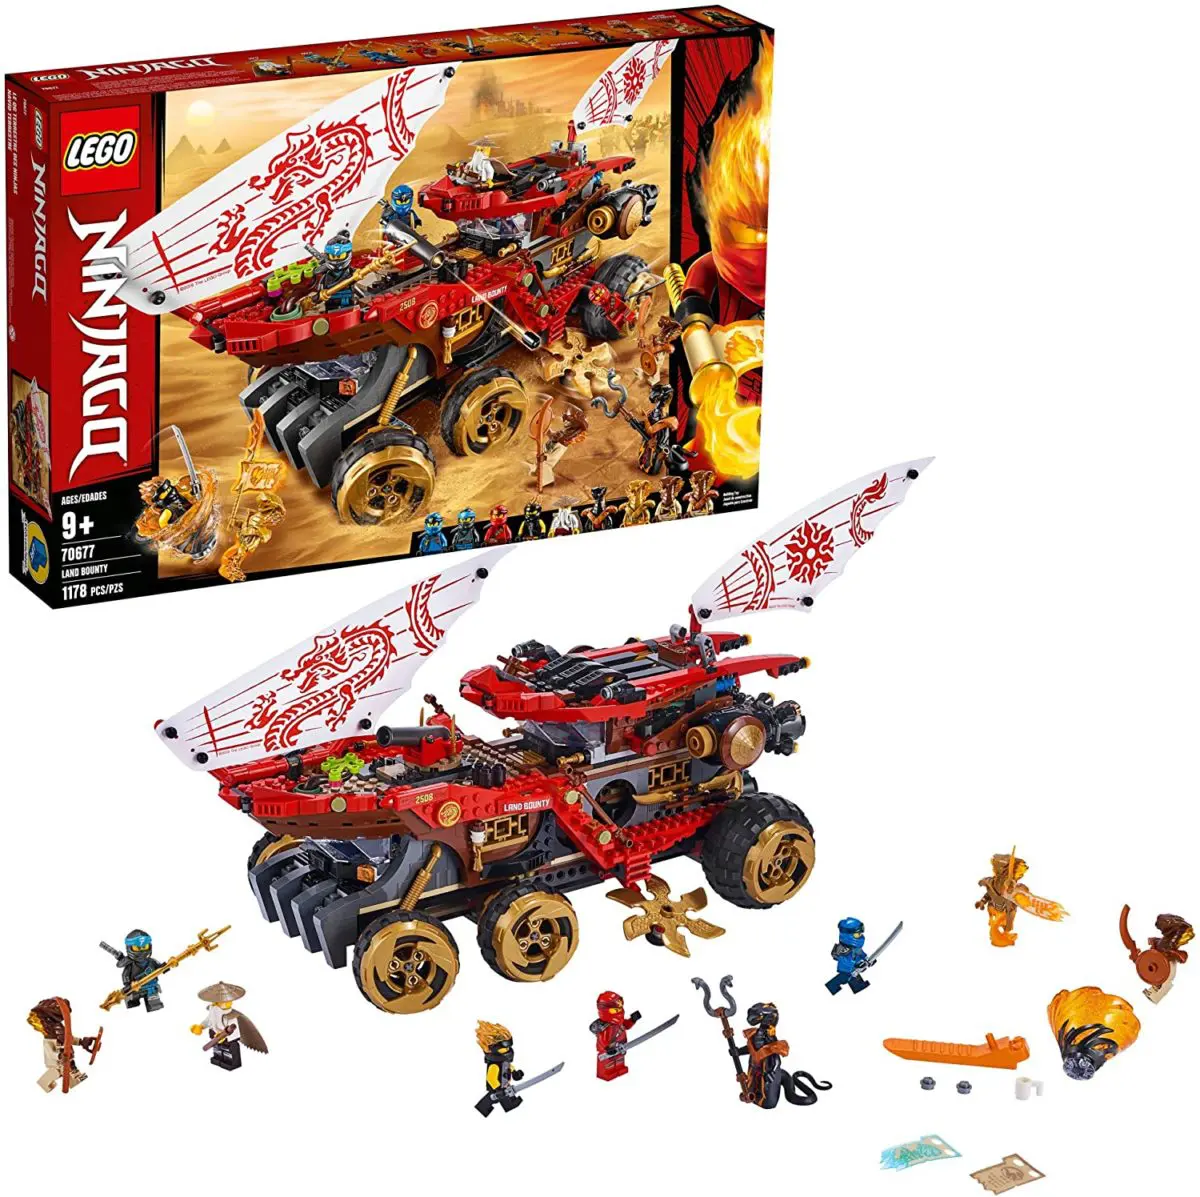 LEGO NINJAGO Land Bounty Toy Truck Building Set - Top Toys and Gifts for Nine Year Old Boys 1